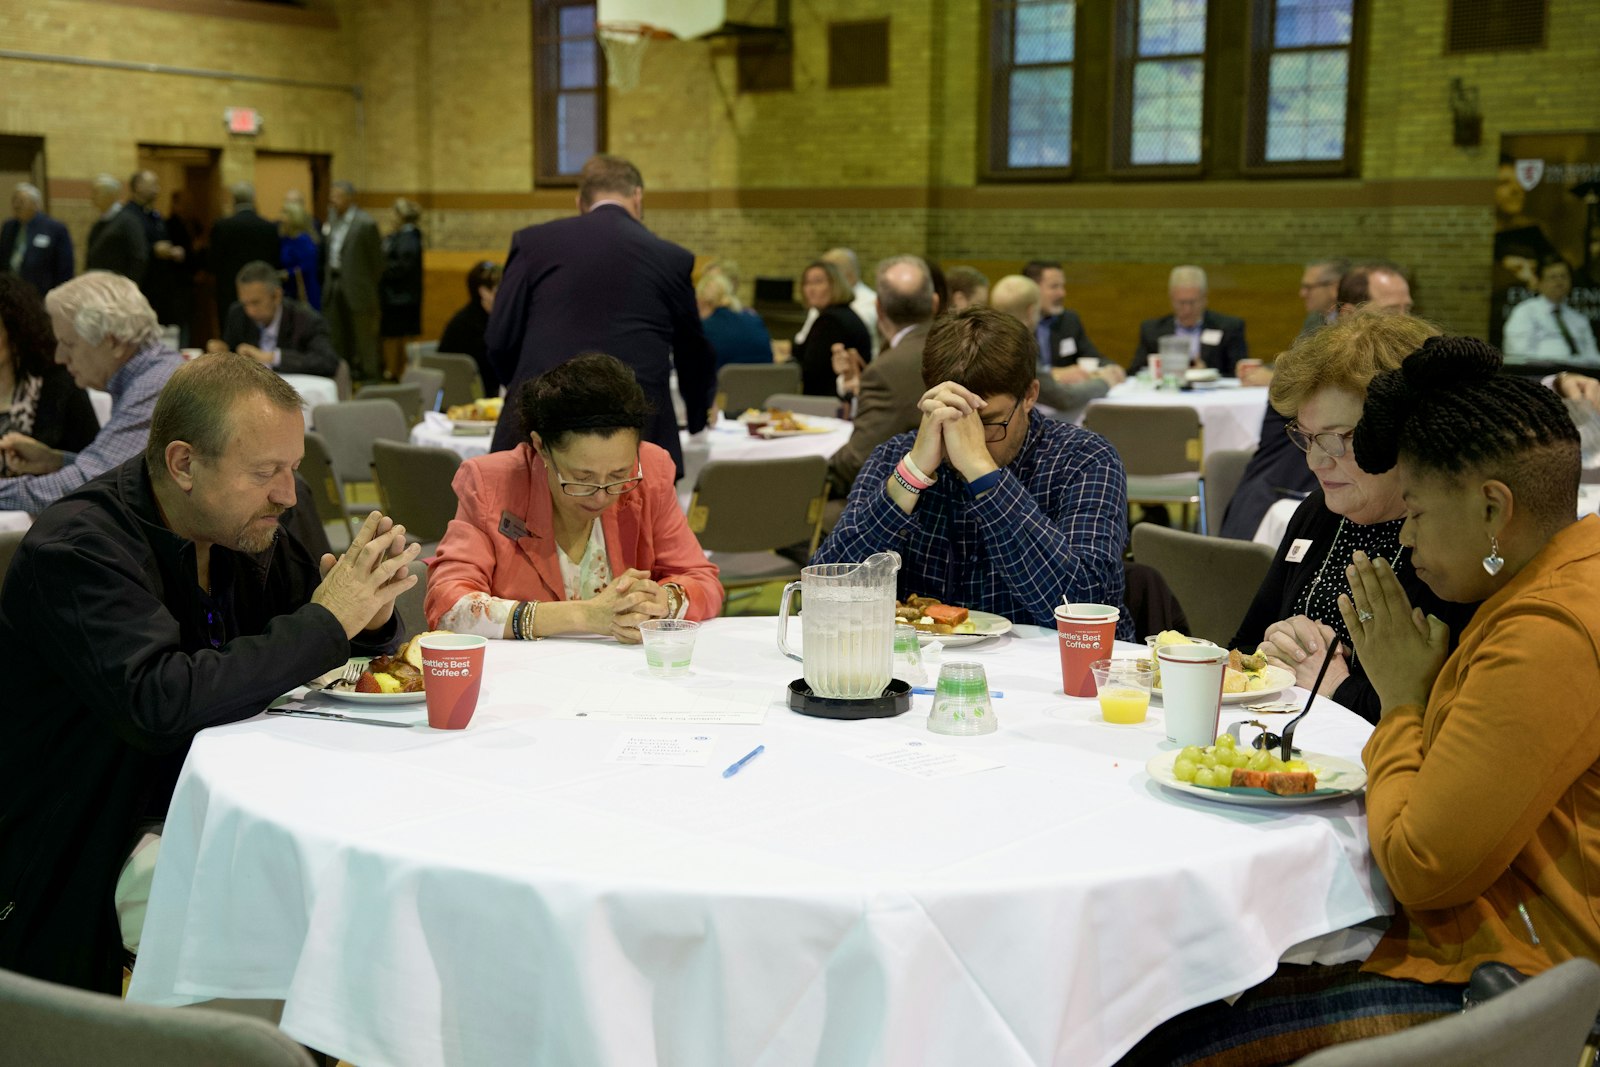 Catholic professionals pray together during a luncheon following the Mass in Sacred Heart's gym. Despite the pressures facing businesses, from inflation to employment, the Catholic faith grounds decisions in the dignity of the human person, Bishop Fisher said.